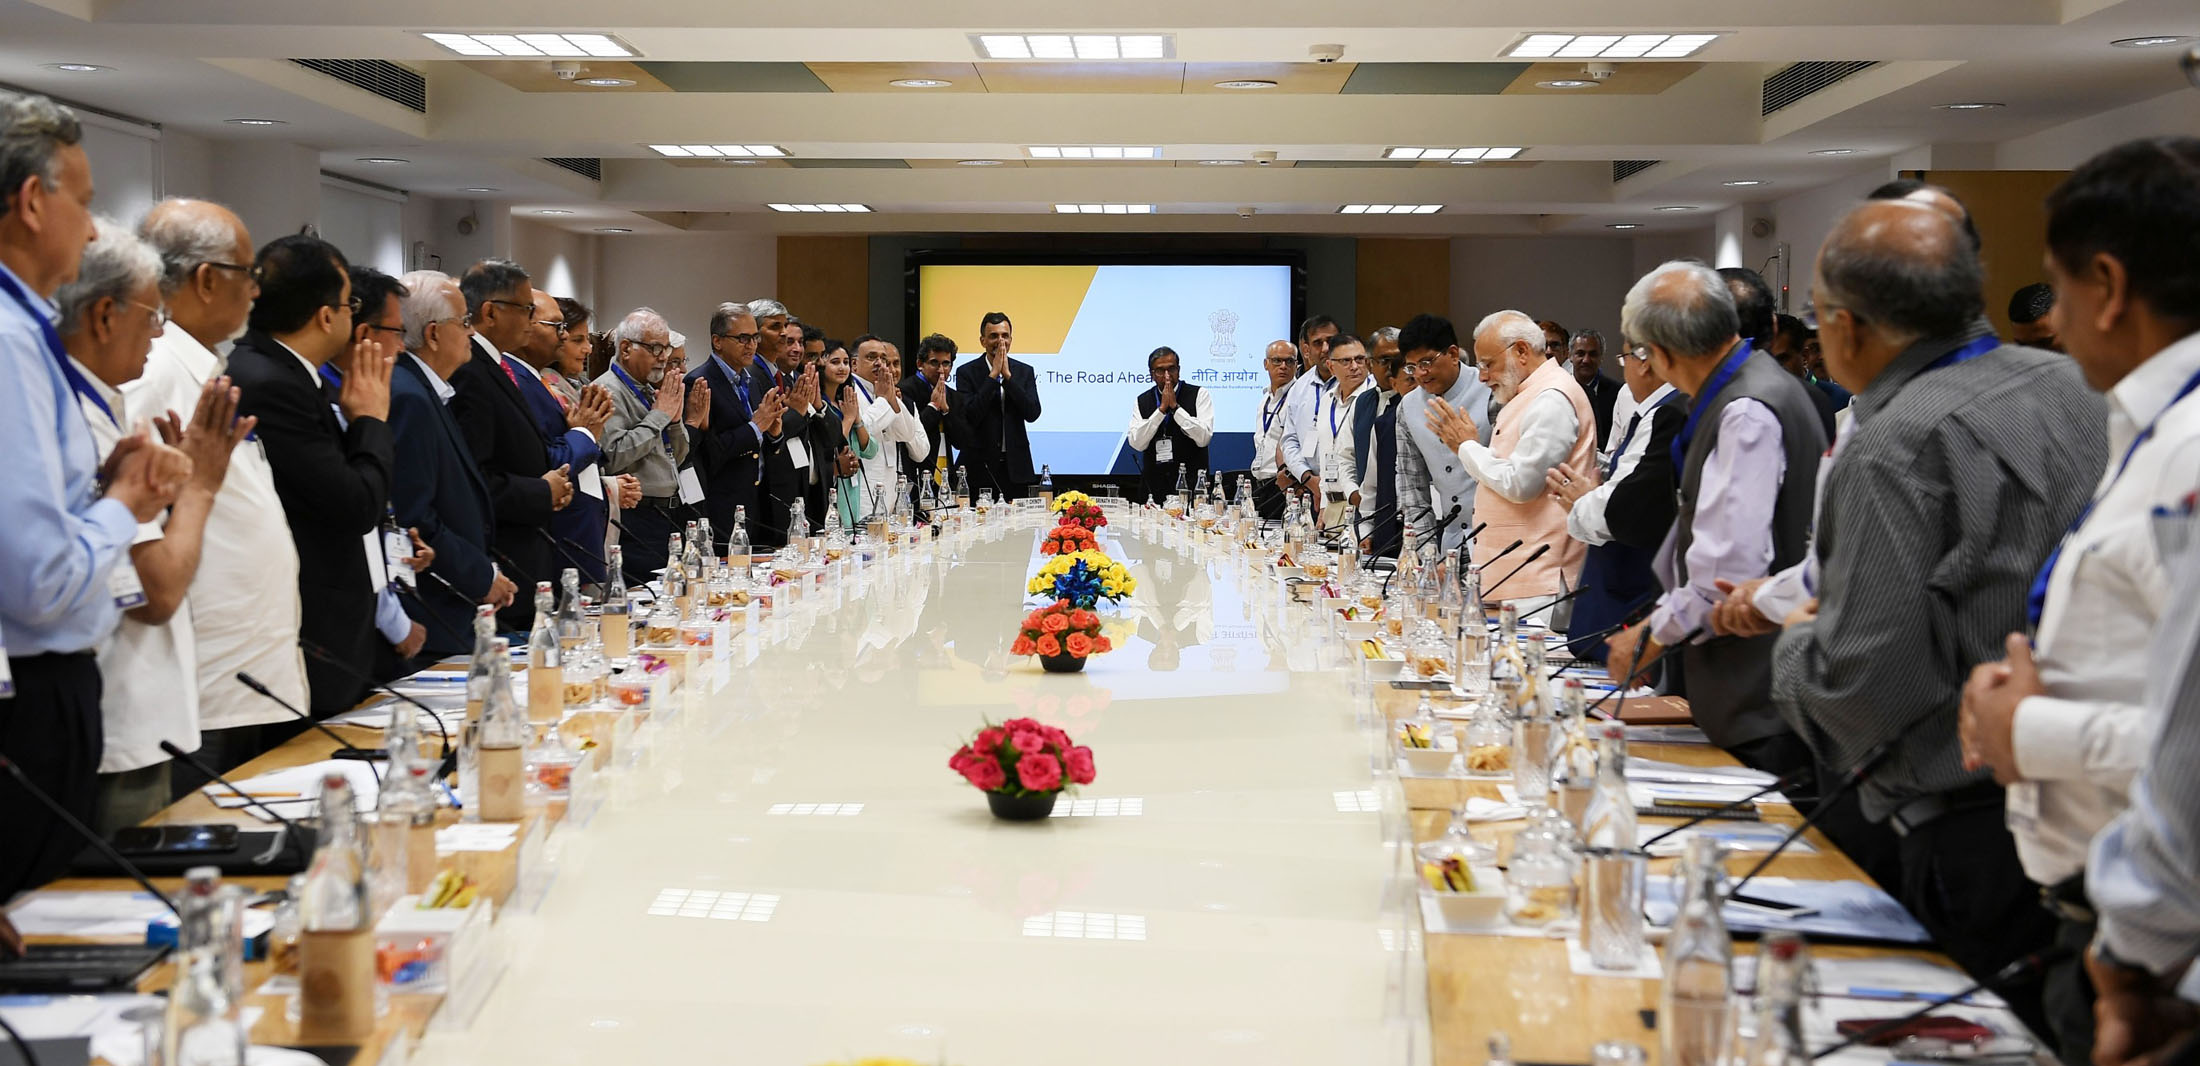 PM interacts with economists and experts on theme “Economic Policy – The Road Ahead”